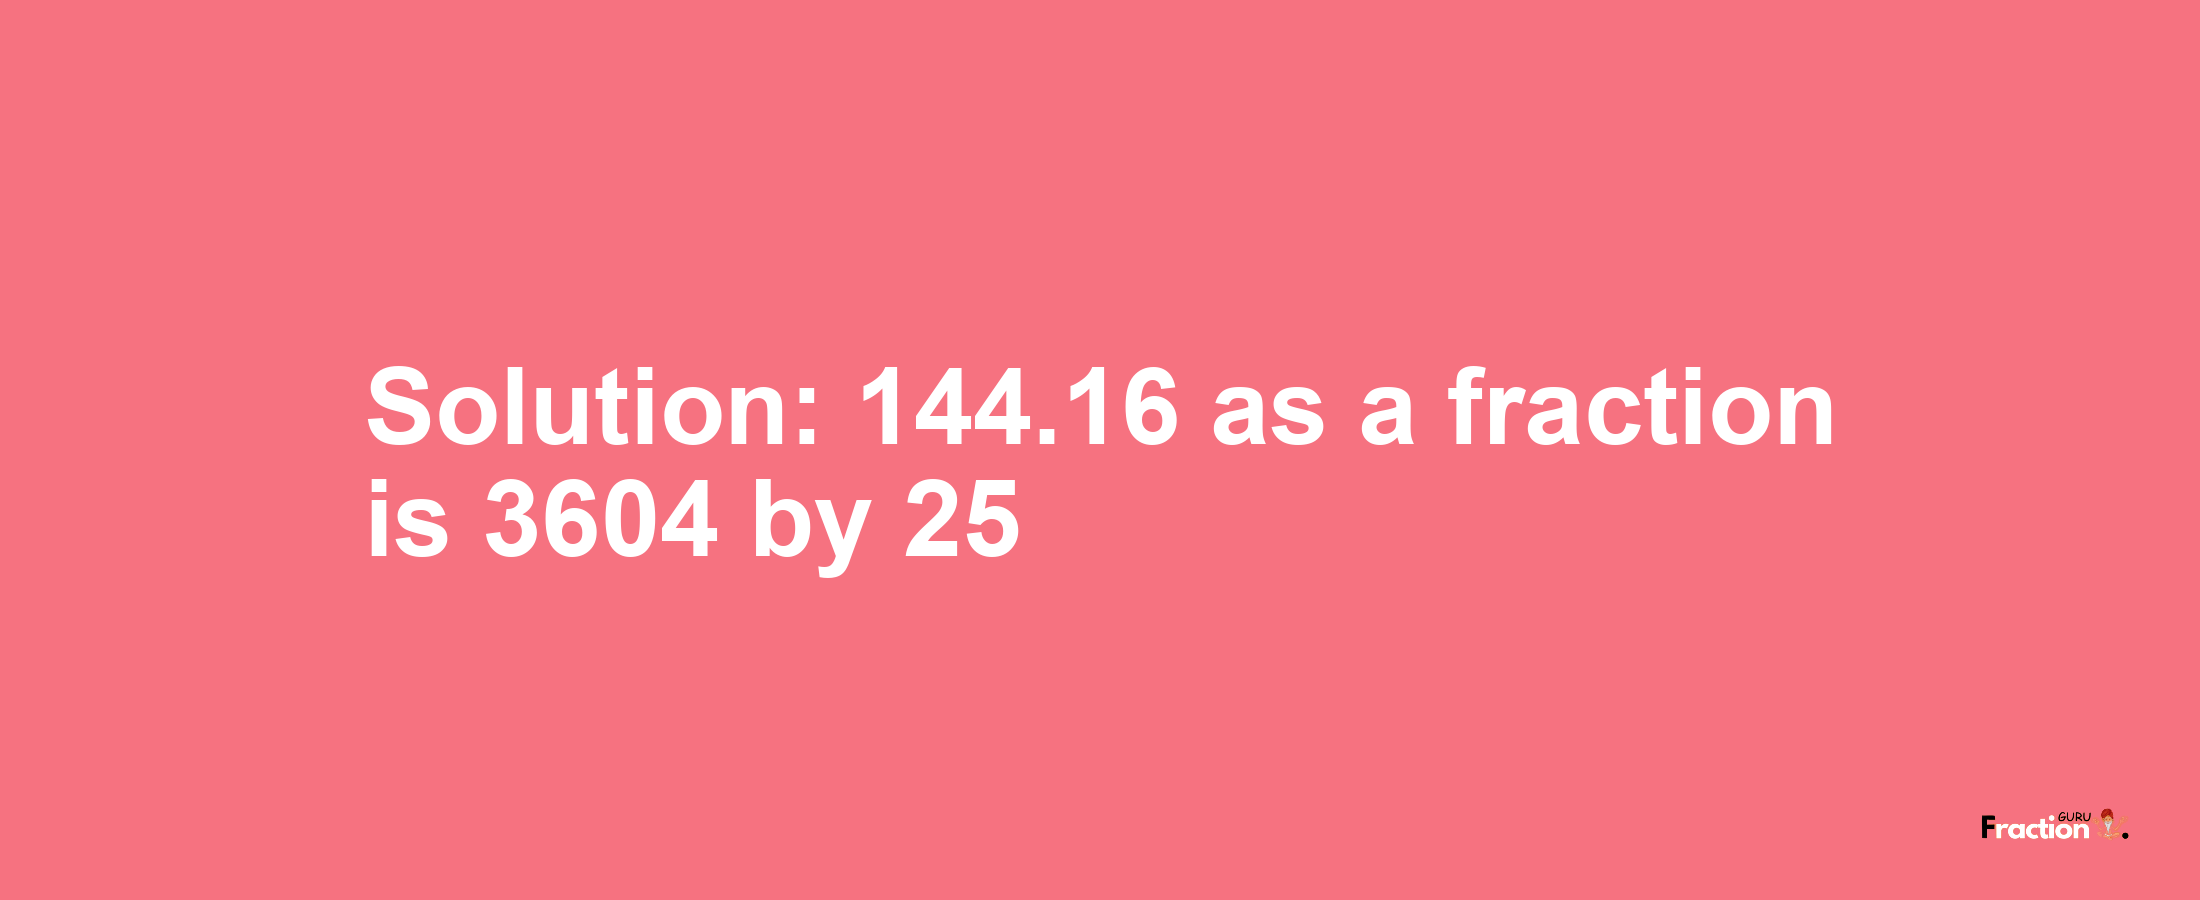 Solution:144.16 as a fraction is 3604/25